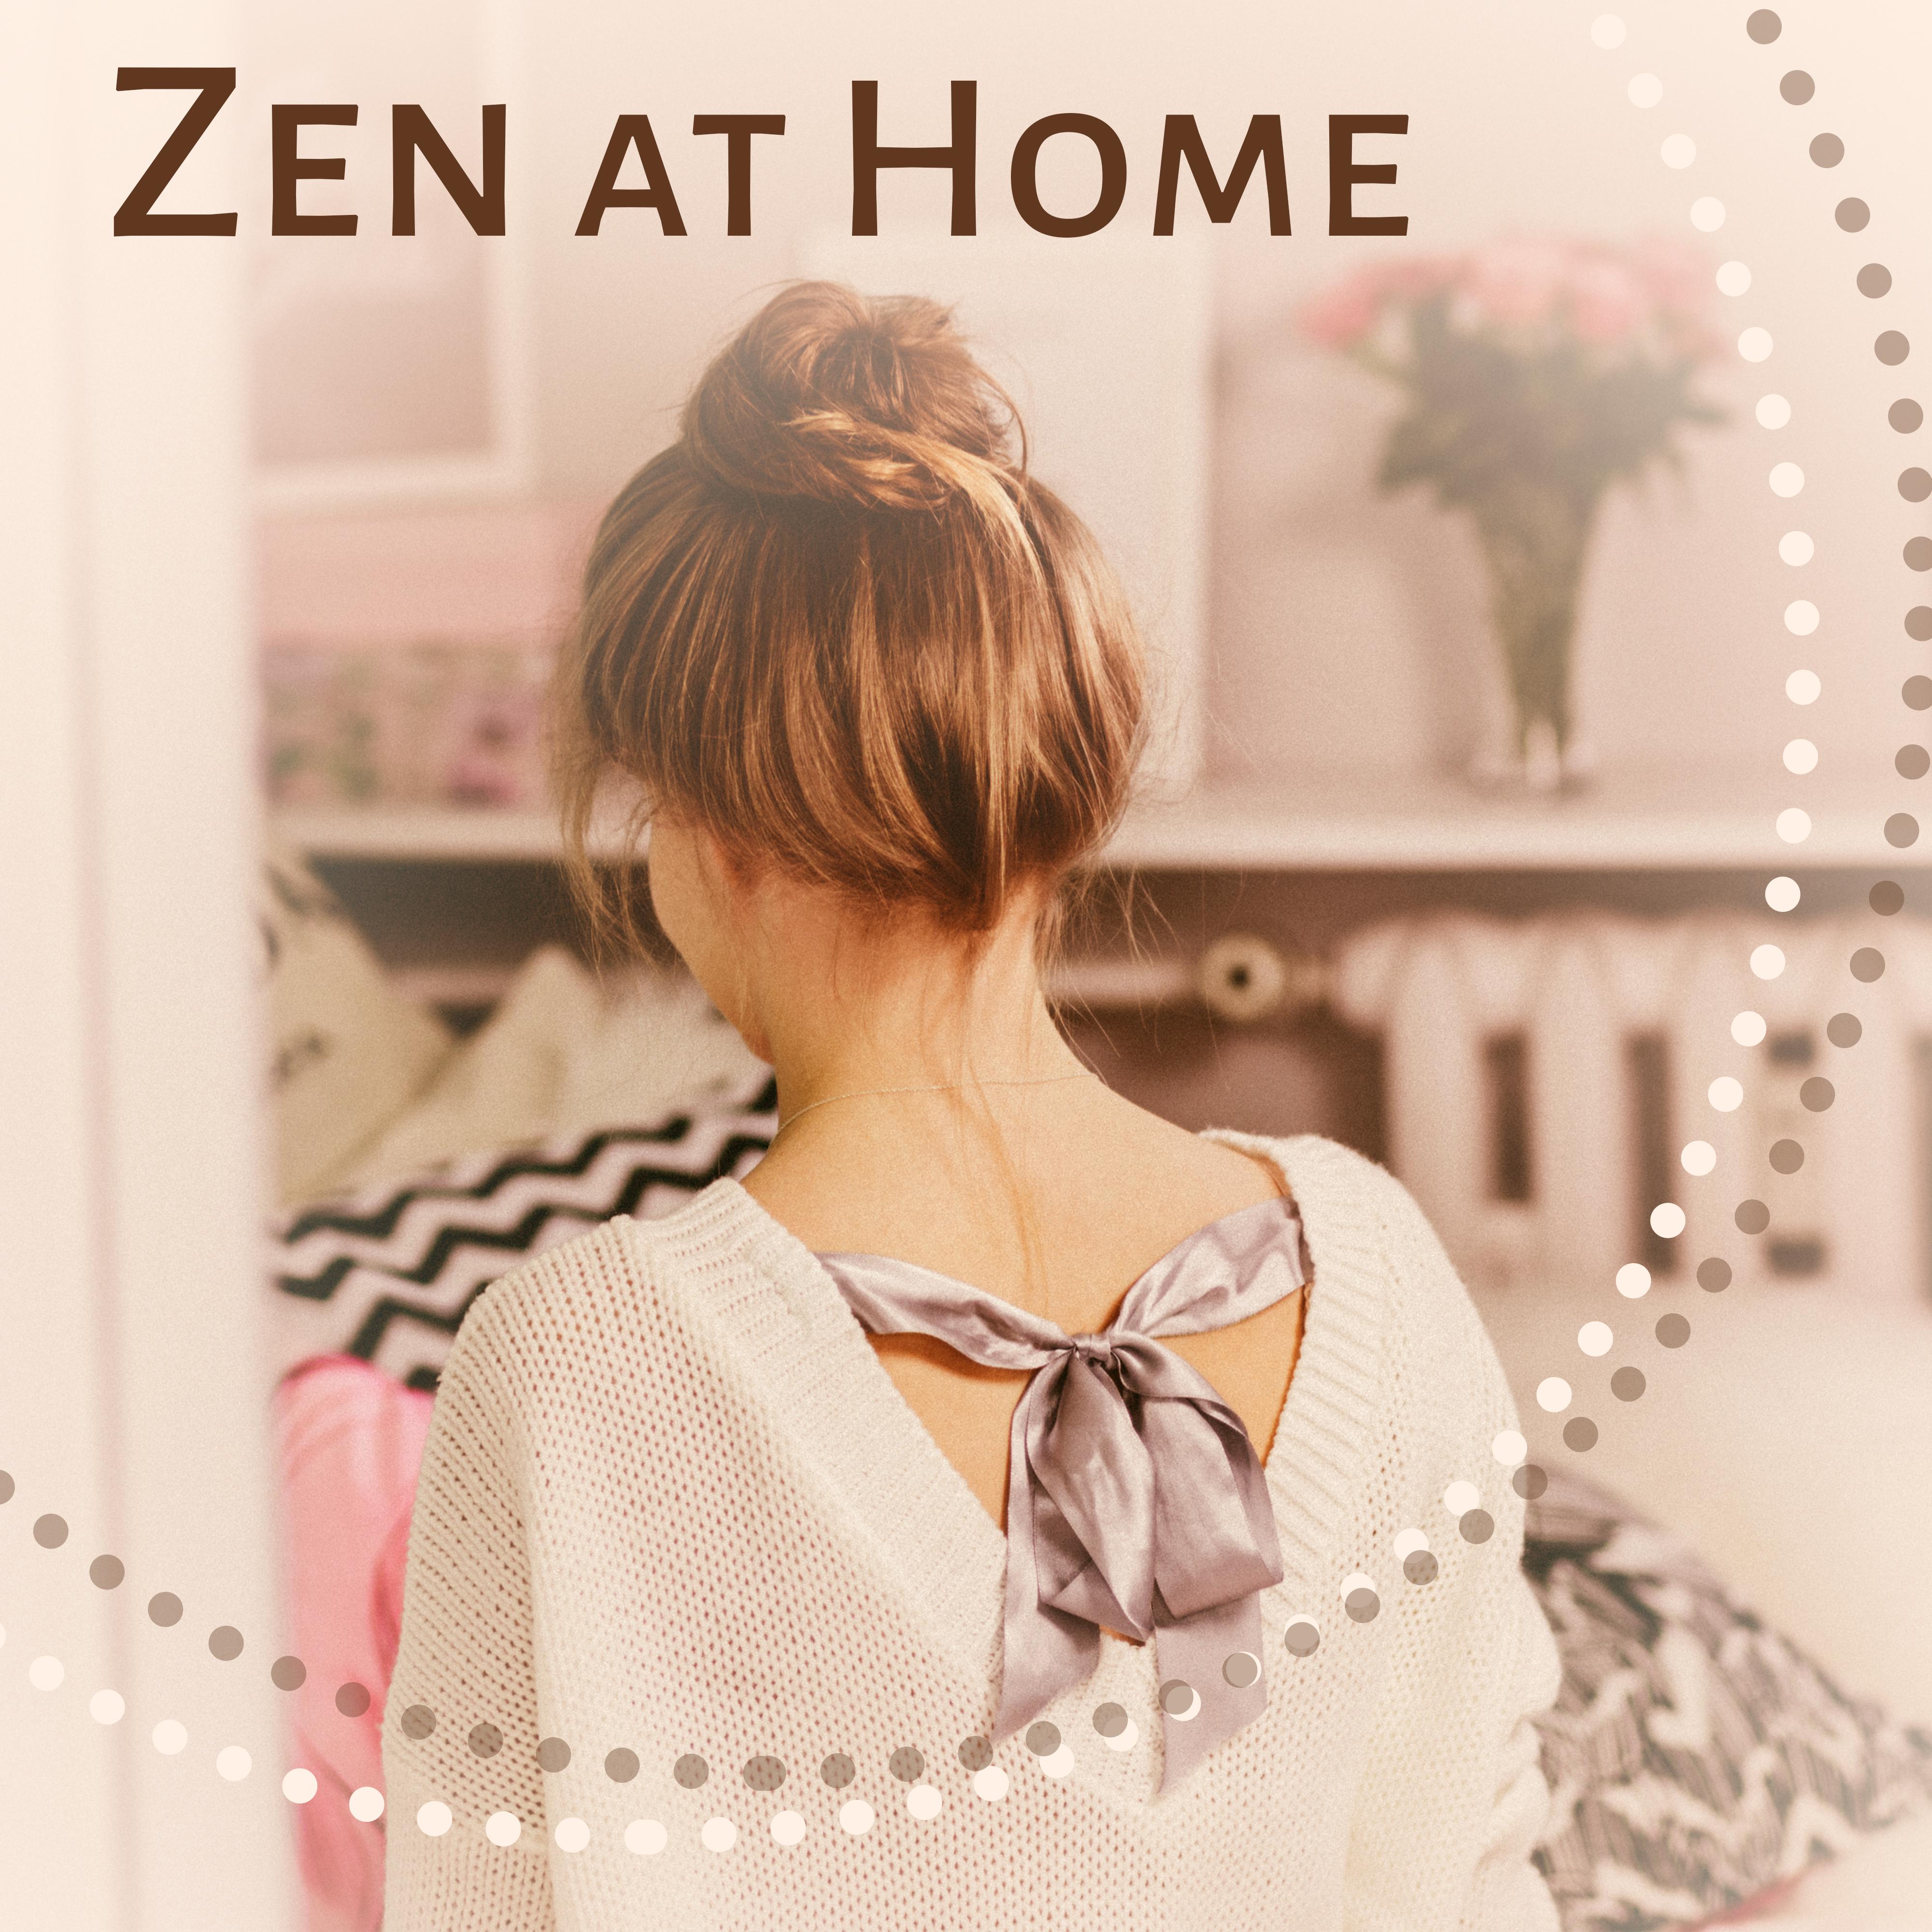 Zen at Home  Calming New Age Music, Yoga at Home, Rest, Deep Relaxation, Music for Meditate